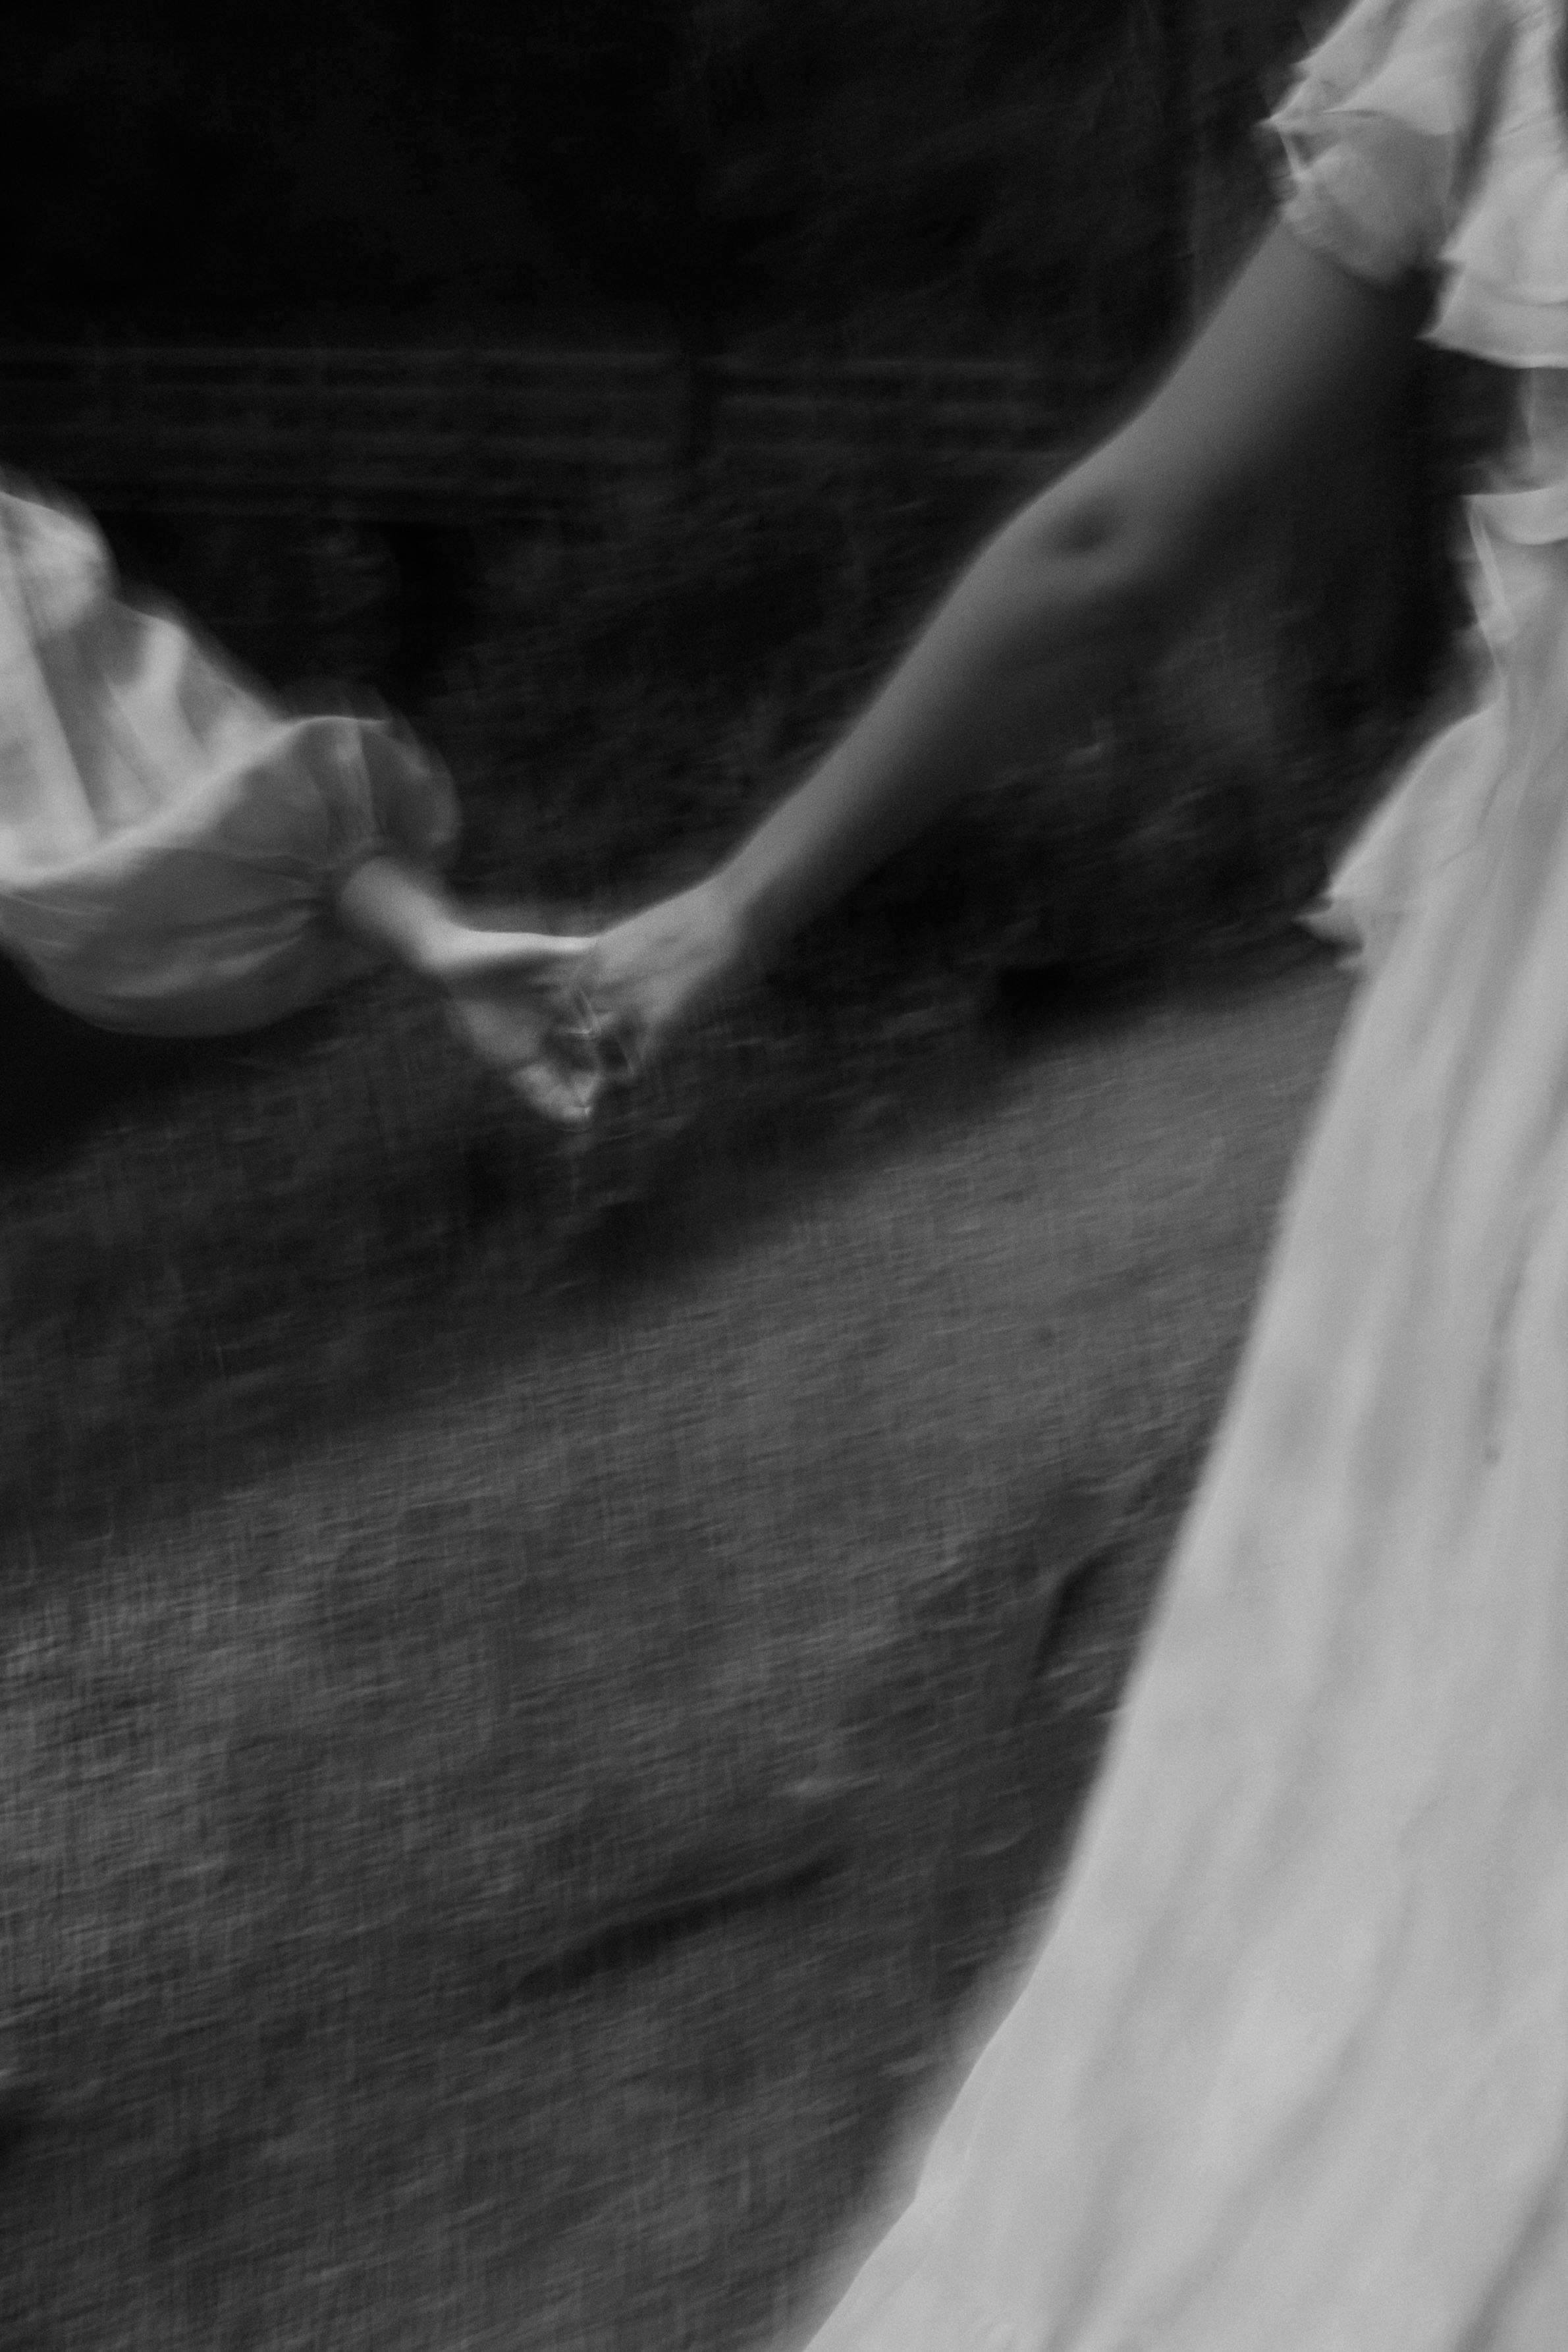 Black and White Blurred Photo of Young People Holding Hands · Free ...